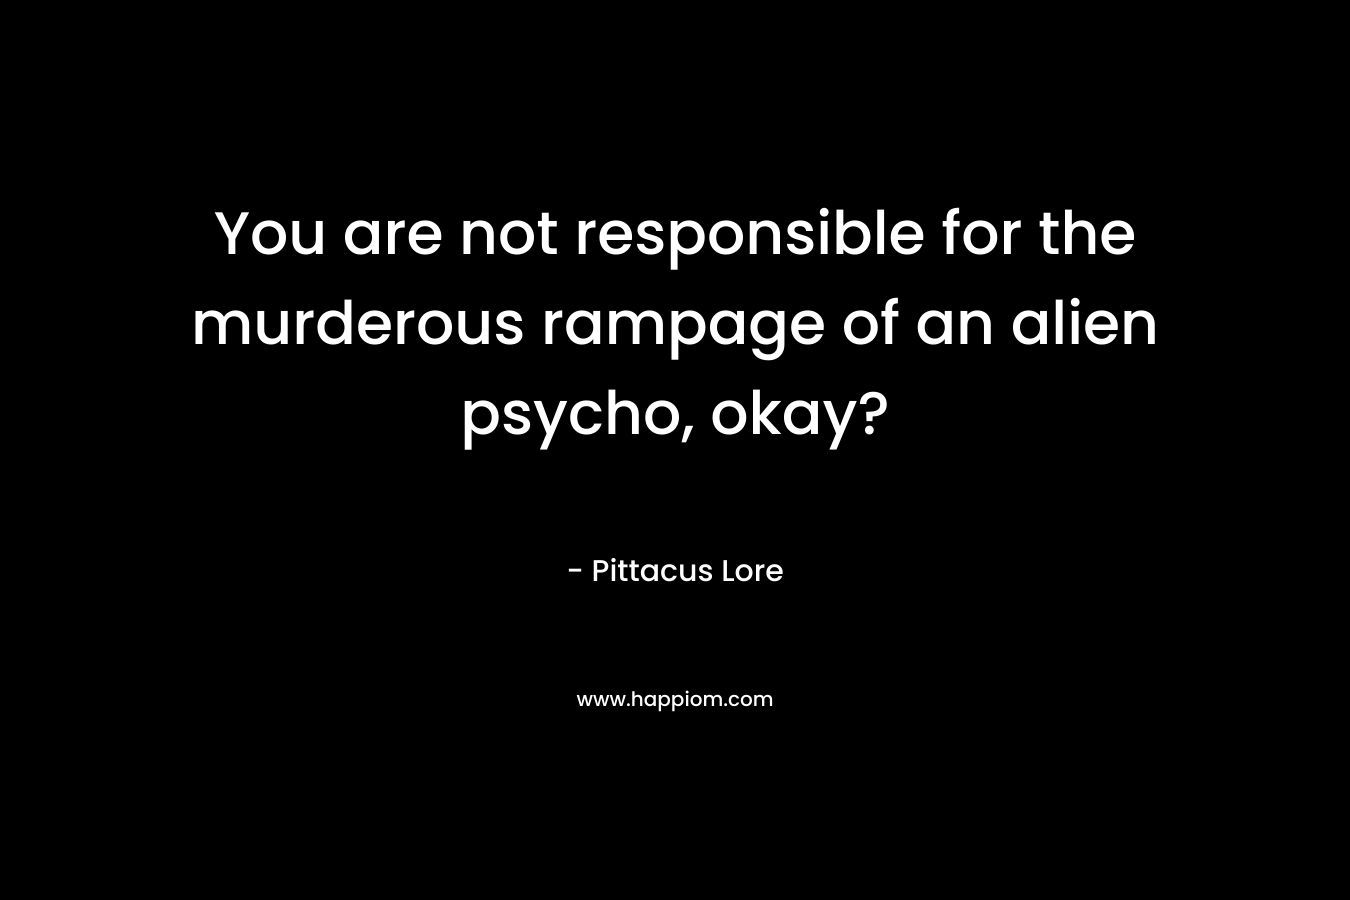 You are not responsible for the murderous rampage of an alien psycho, okay? – Pittacus Lore